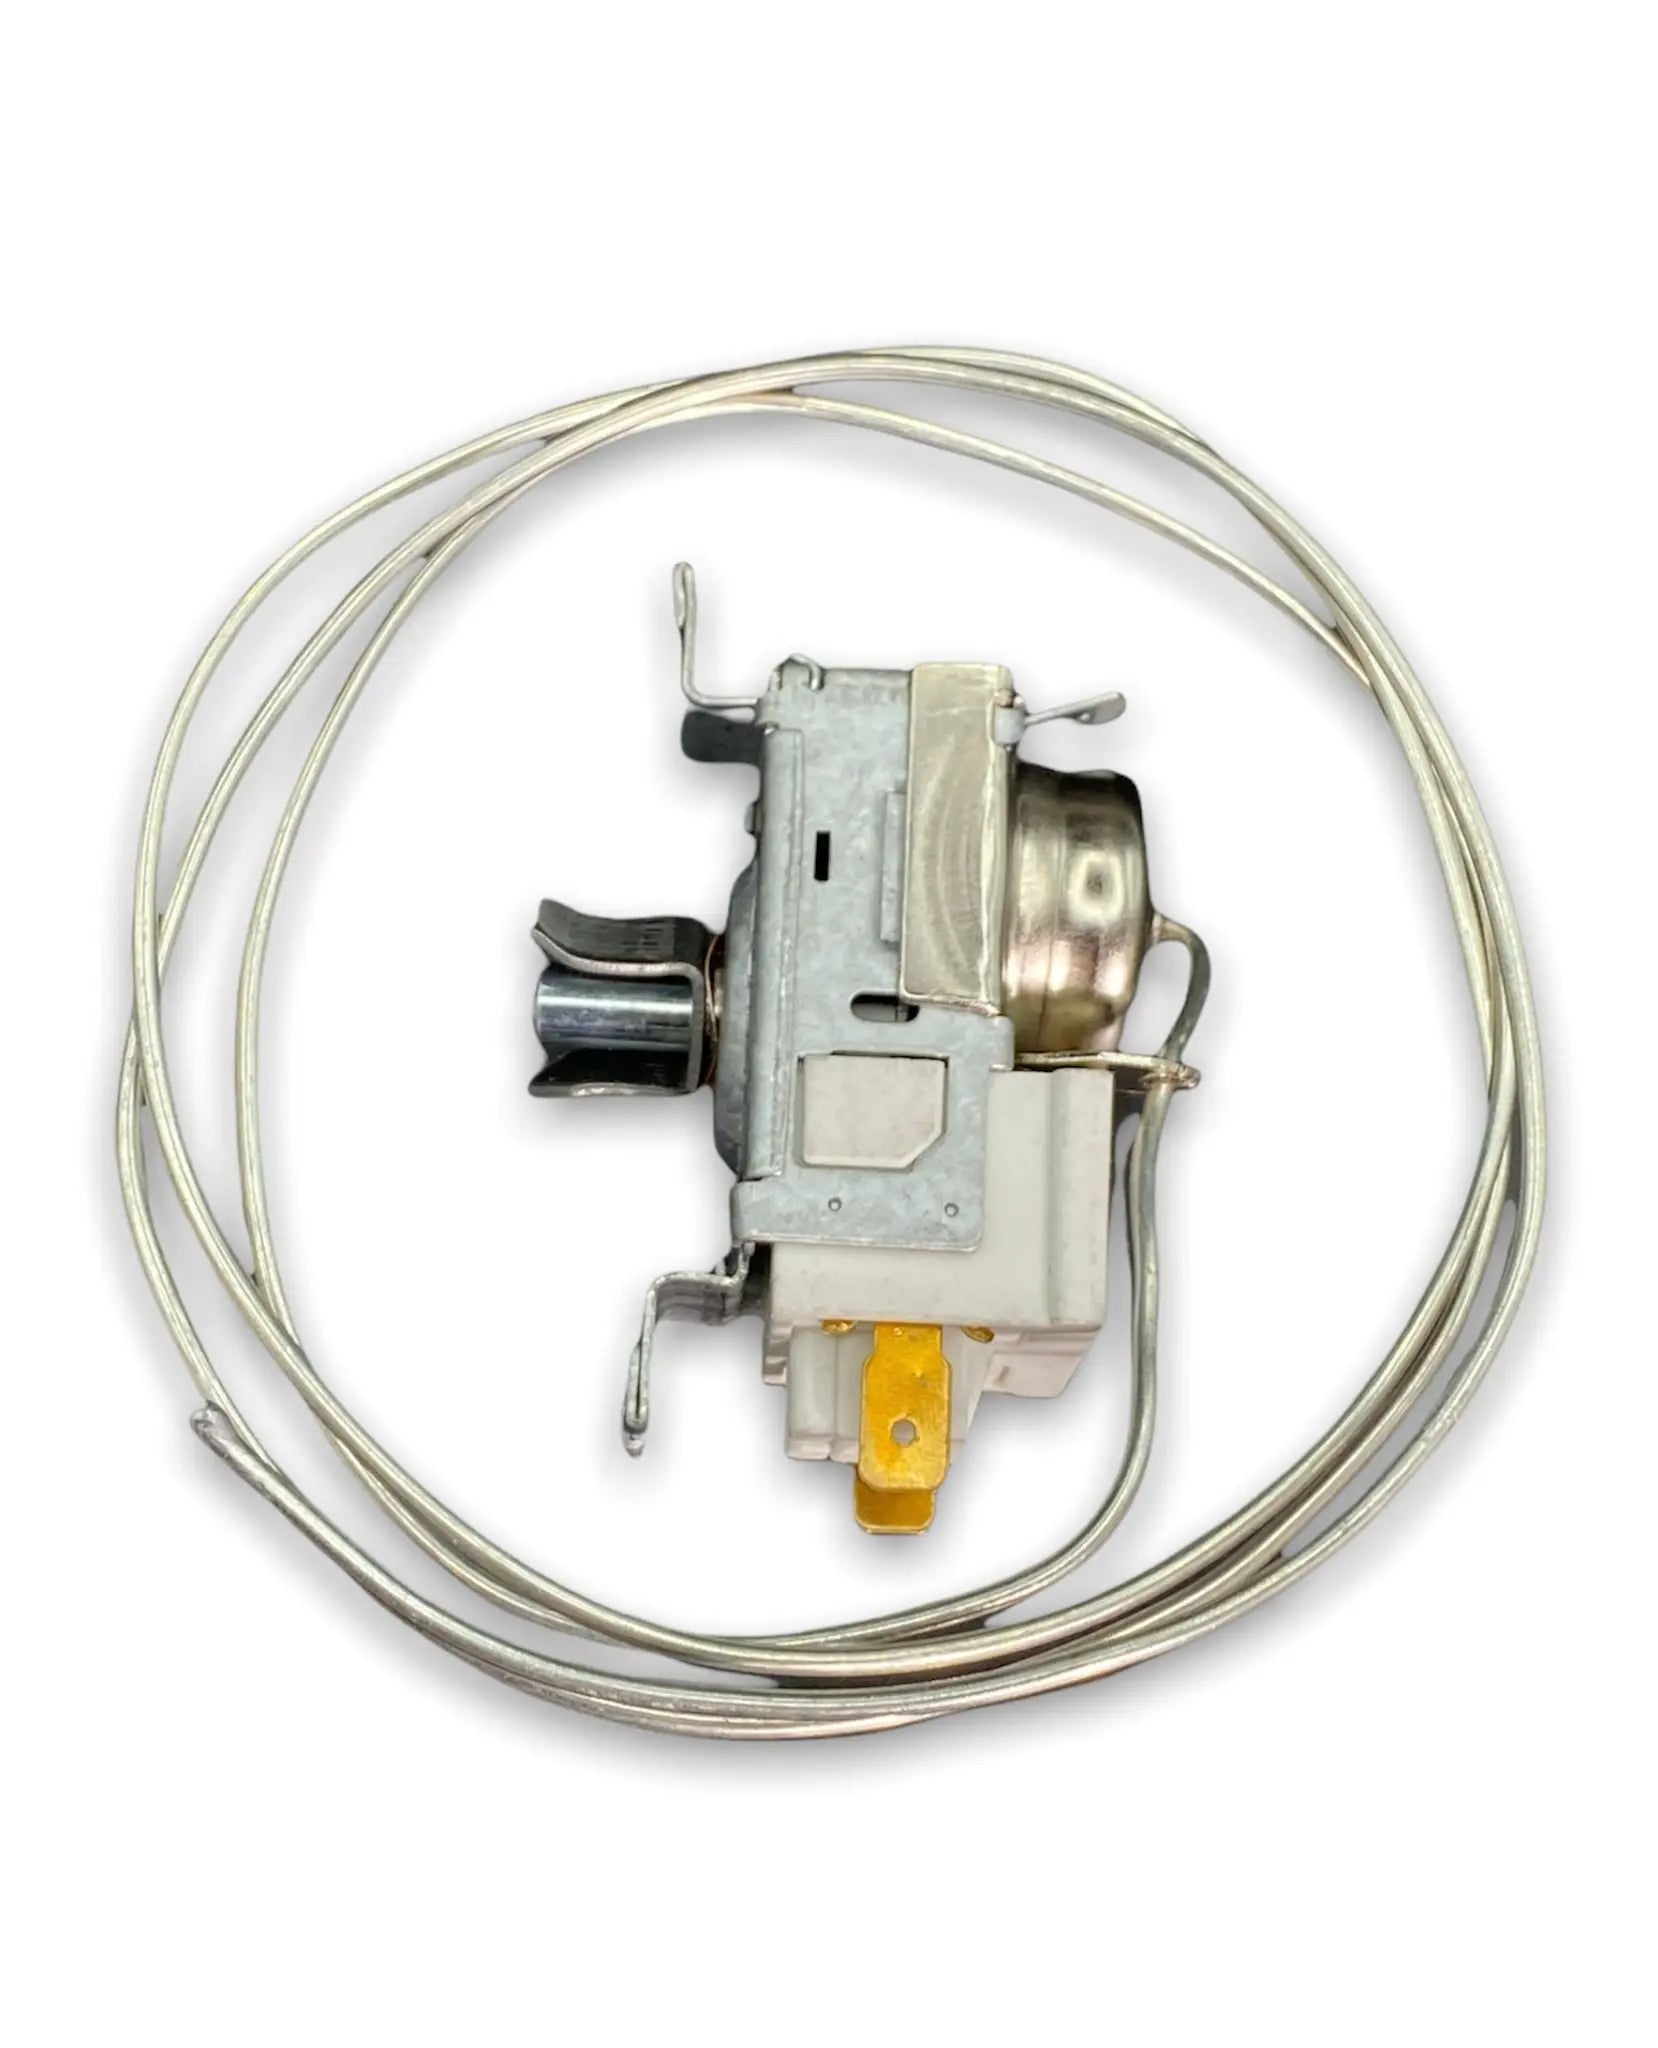 Electrolux Refrigerator Temperature Control (Thermostat) - 241537104, REPLACES: 1196510 241507701 241586501 2415865-01 241586502 PD00005157